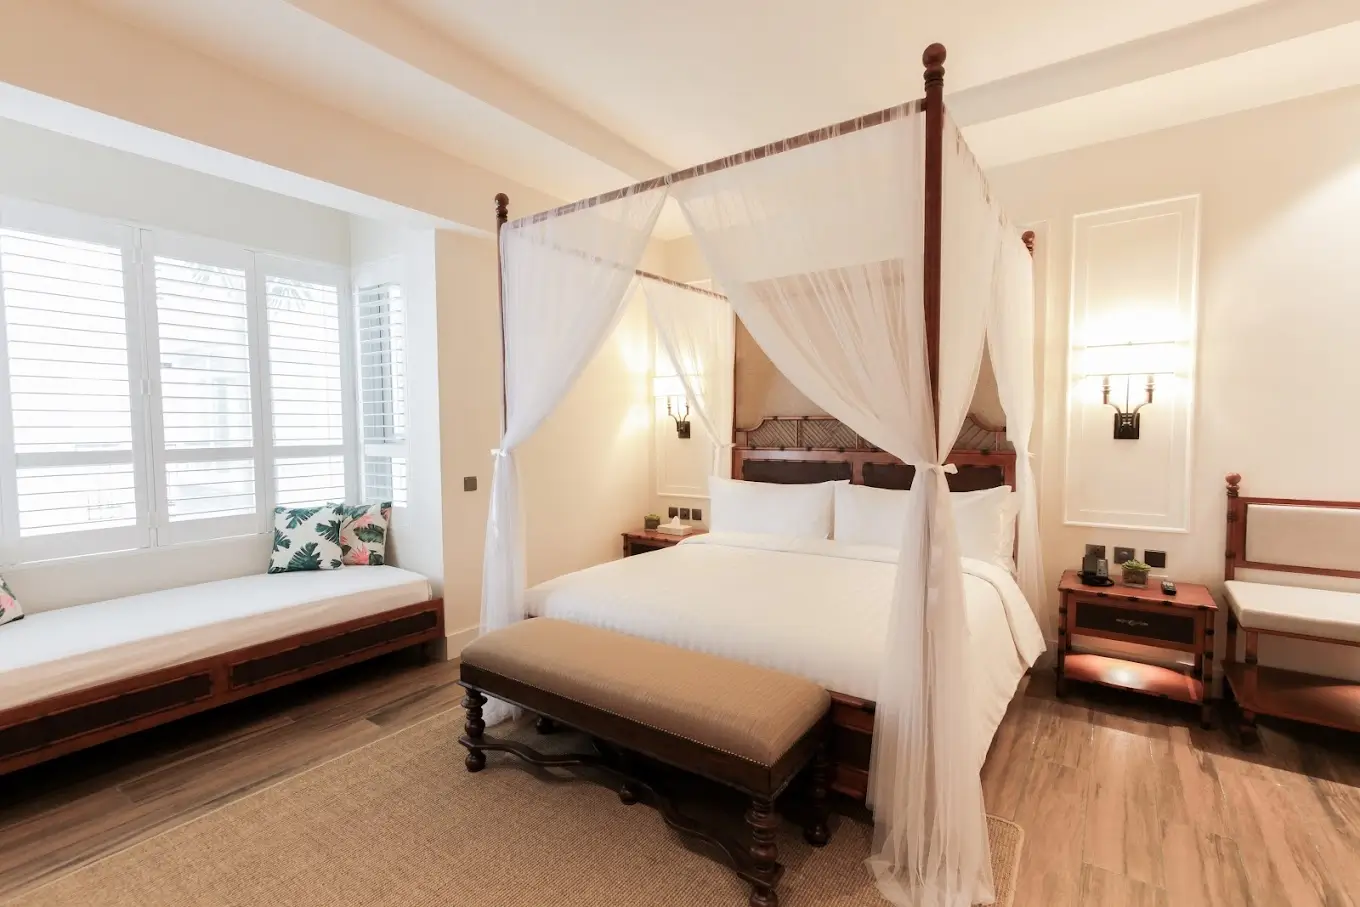 Charming and cozy bedroom in Feliz Hotel, a boutique hotel in Boracay, with a king-sized four-poster bed draped with sheer fabric, accented with rich wood furniture and tropical-themed cushions.